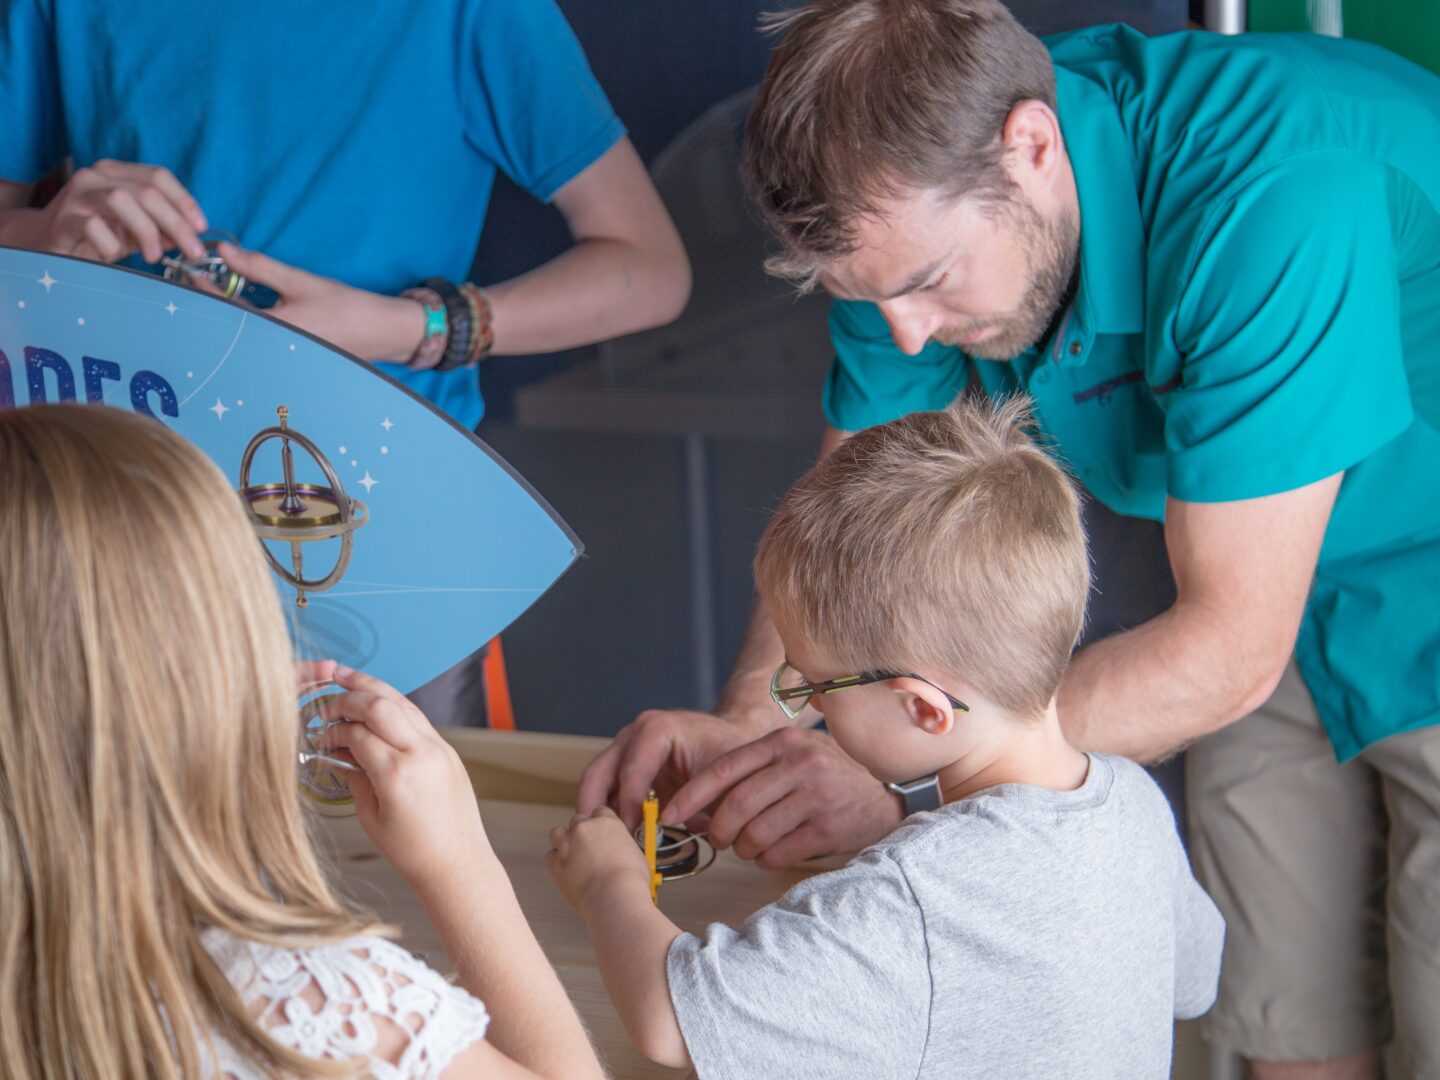 Father & son do a hands-on activity in Mission Aerospace exhibit